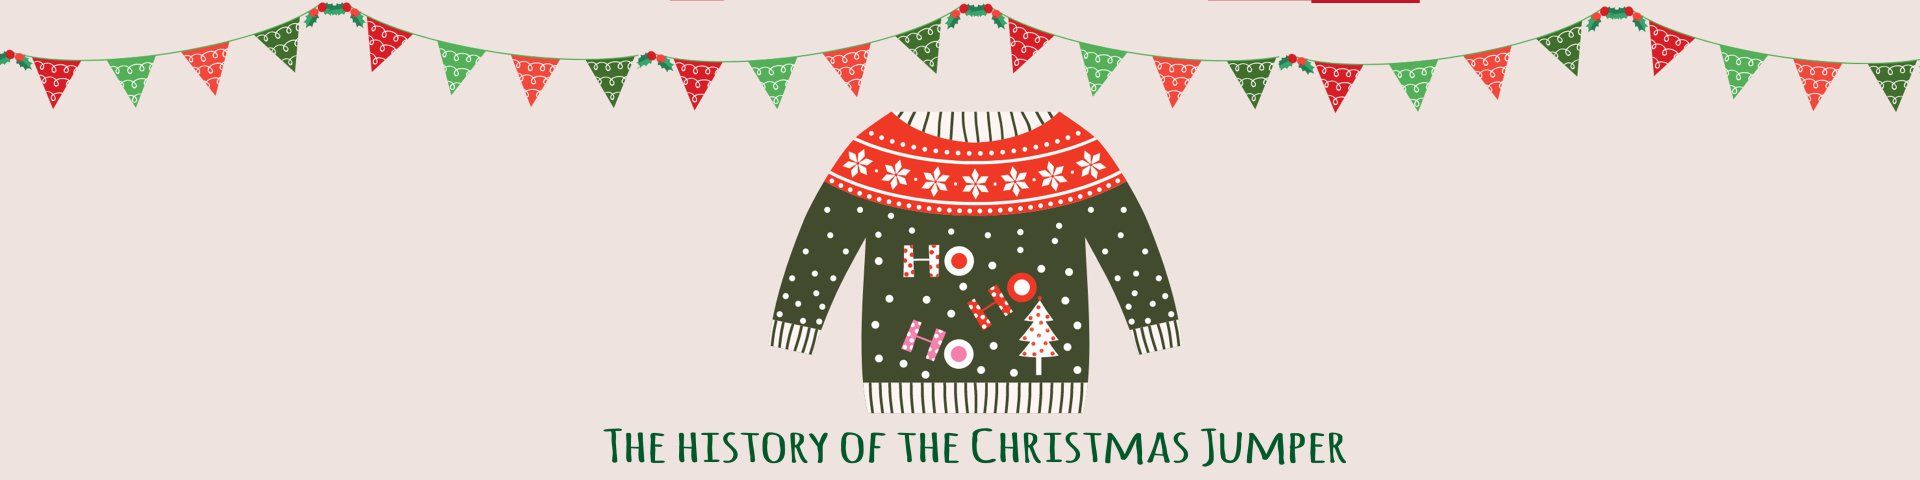 The History of the Christmas Jumper